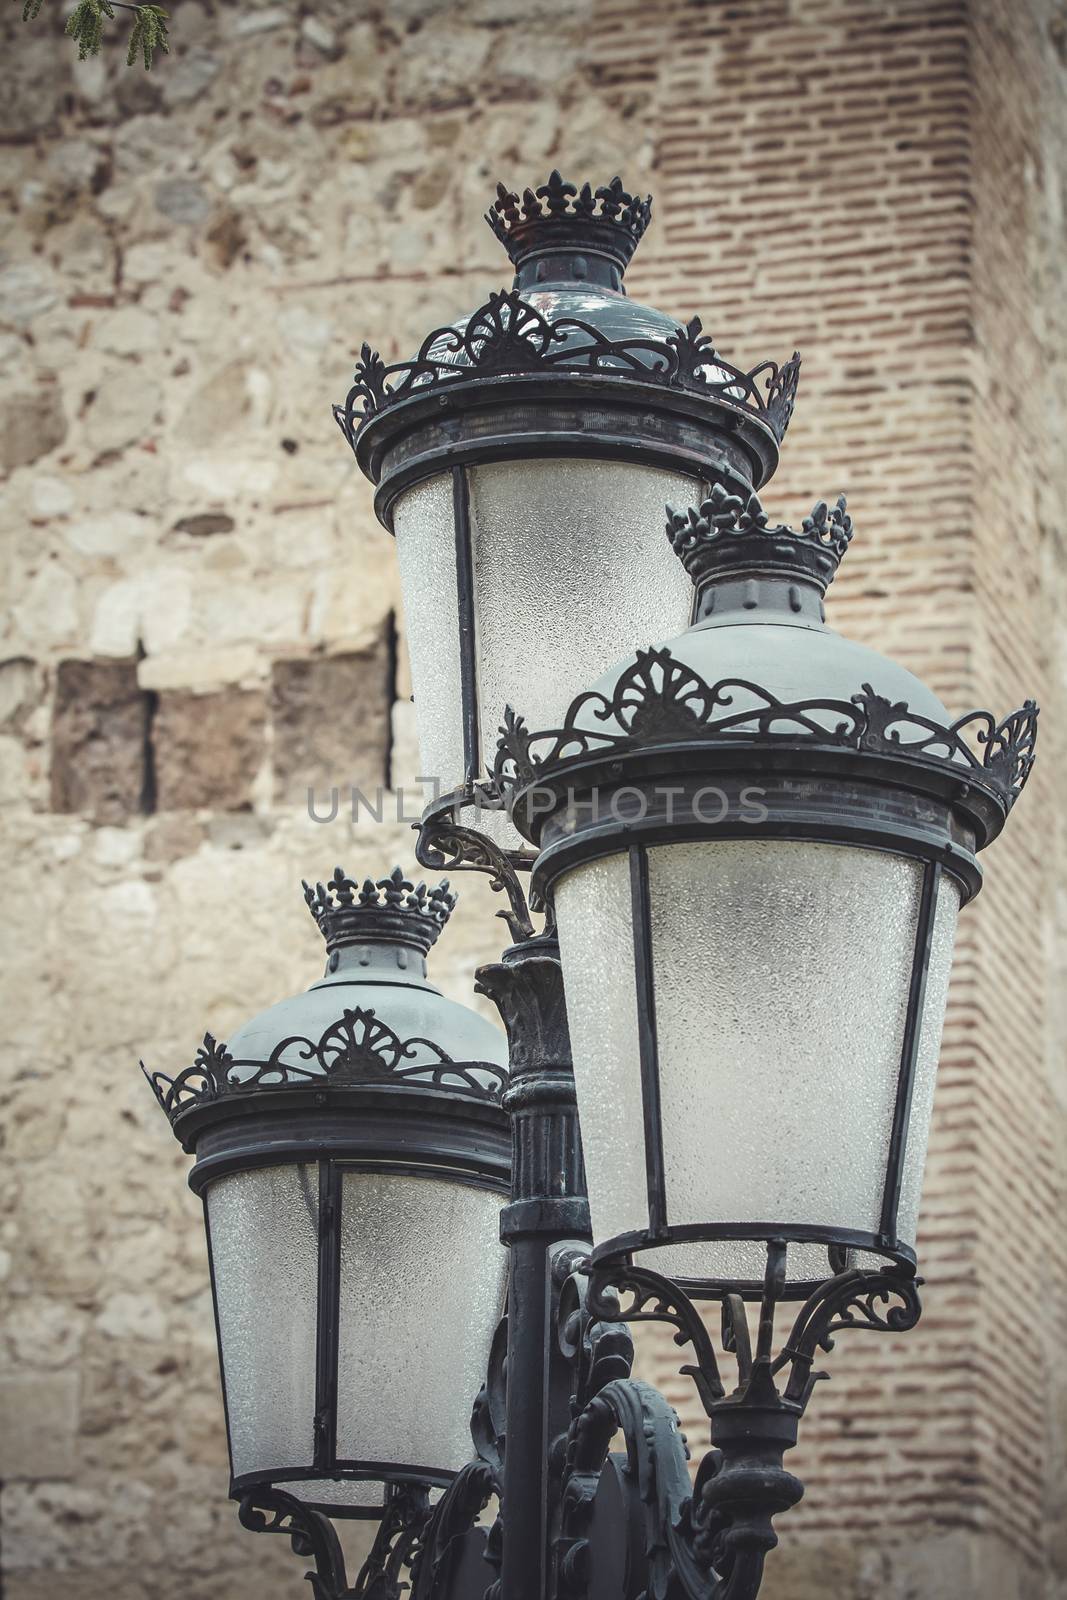 europe, traditional street lamp with decorative metal flourishes